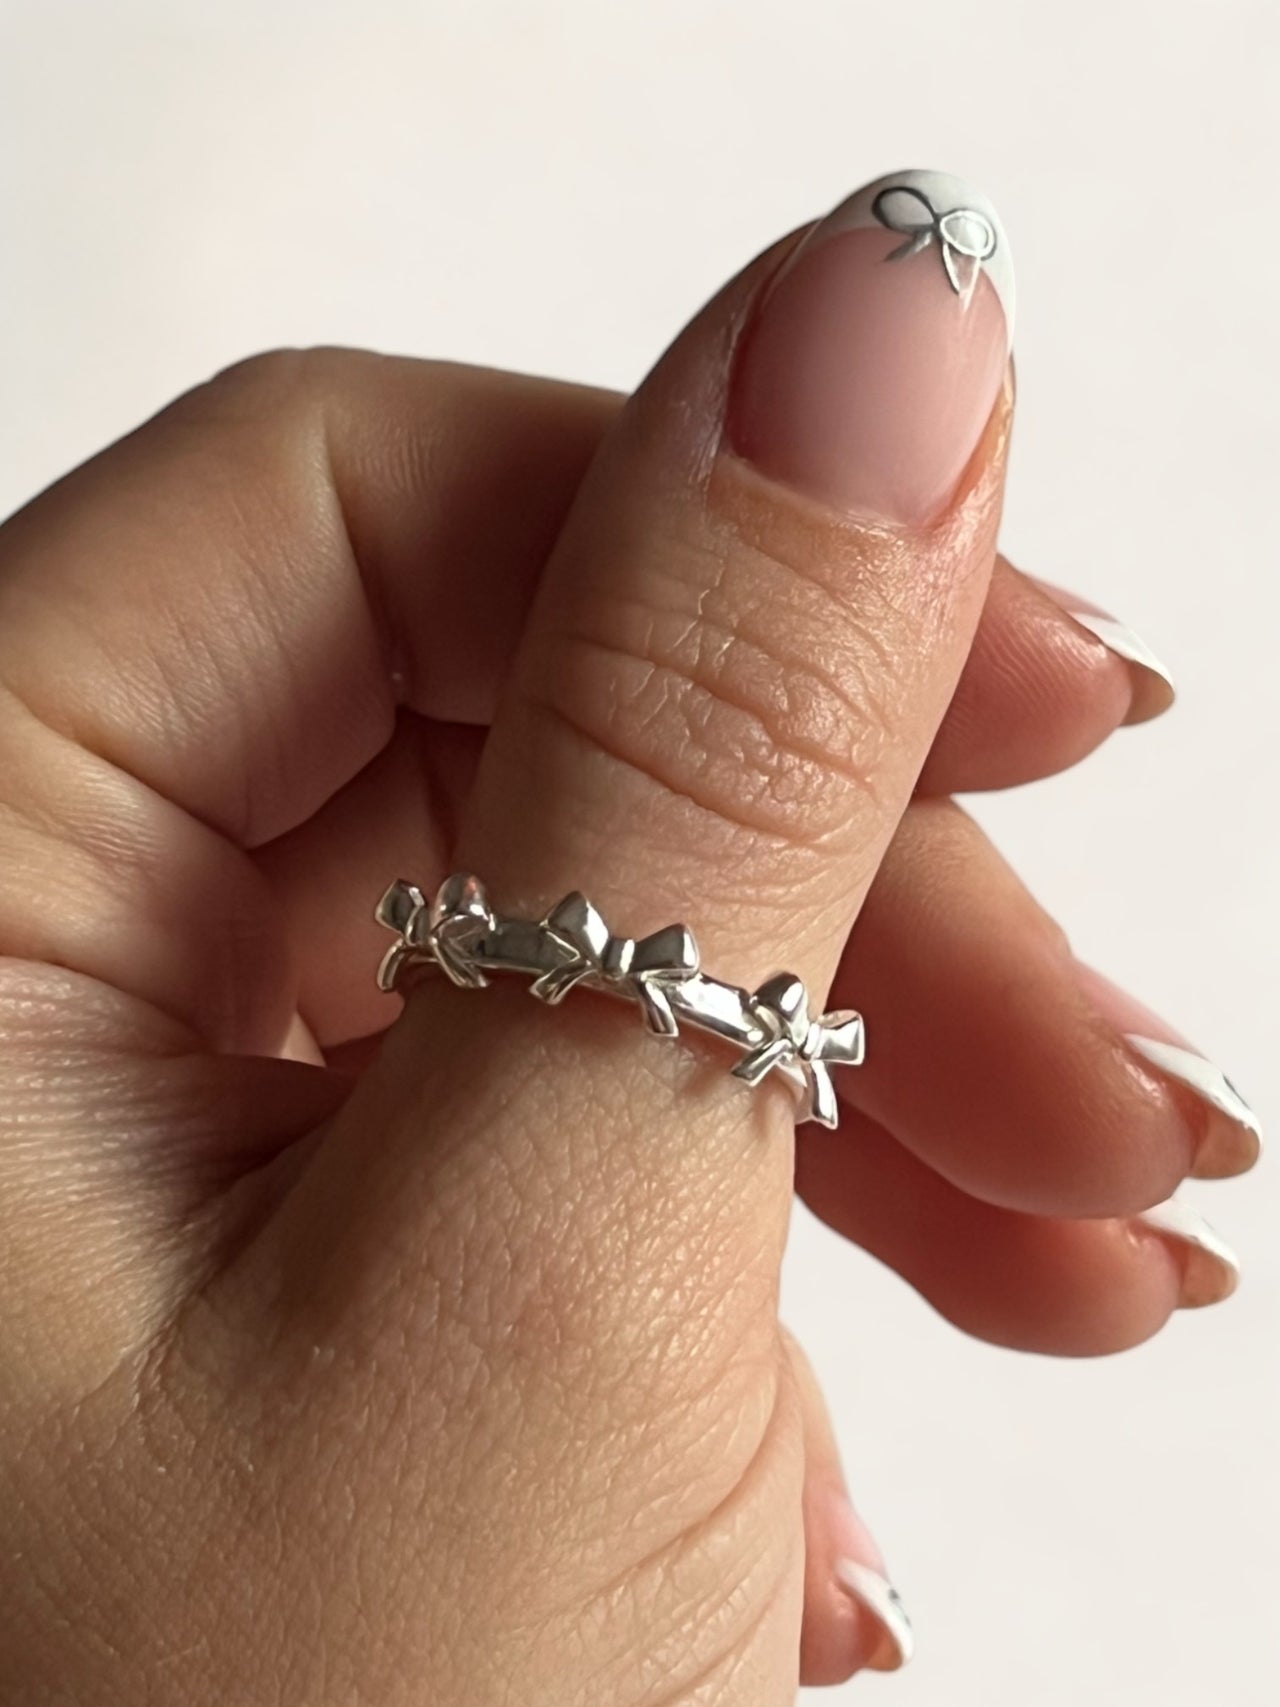 Triple Bow Ring - Silver